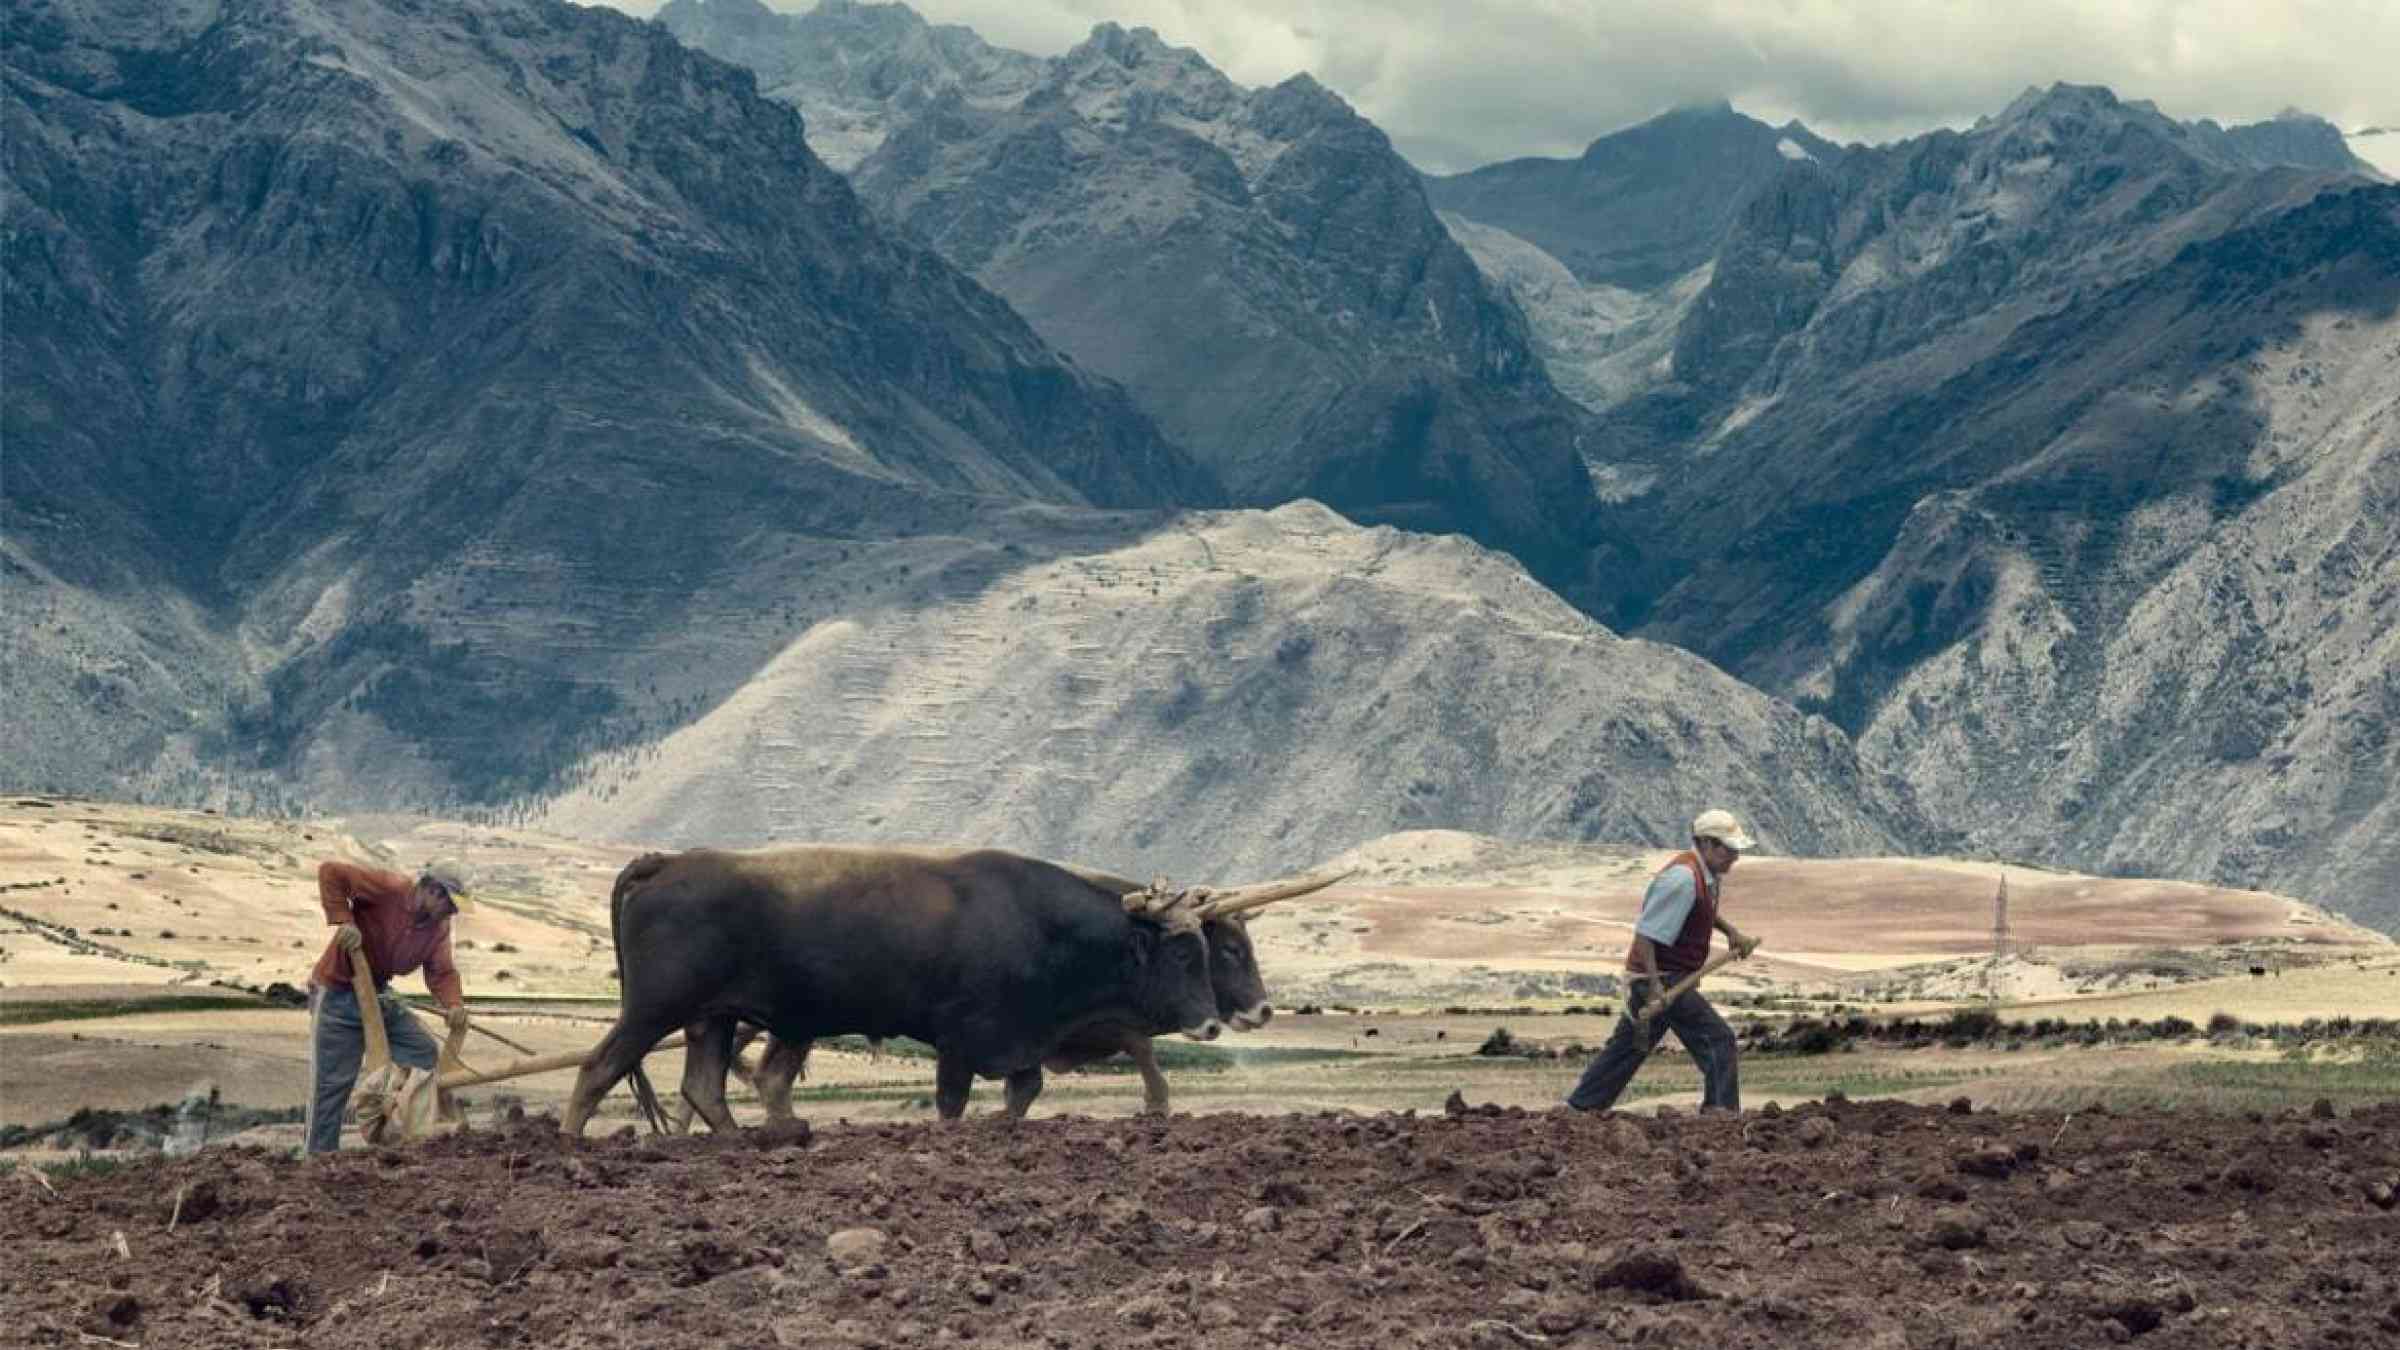 Sharecroppers plow a field in Urubamba Valley in Peru